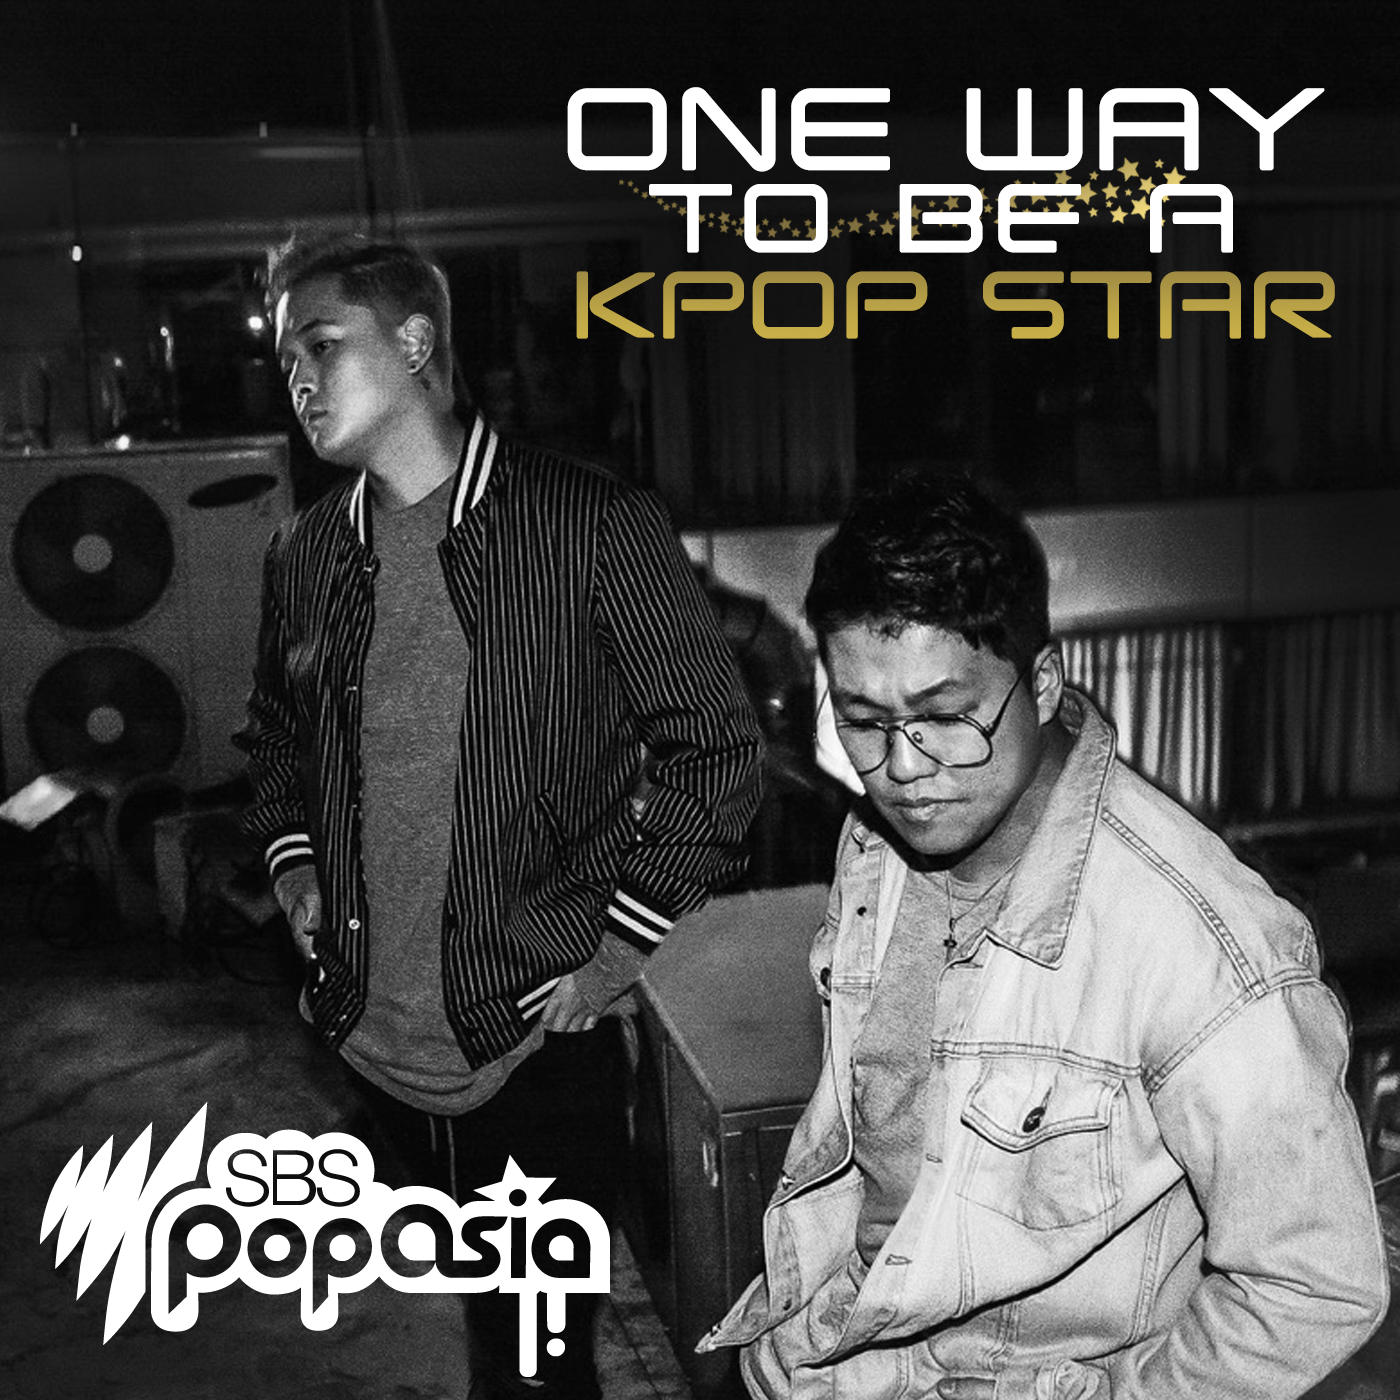 Ep 6 - The new way of promoting K-Pop music